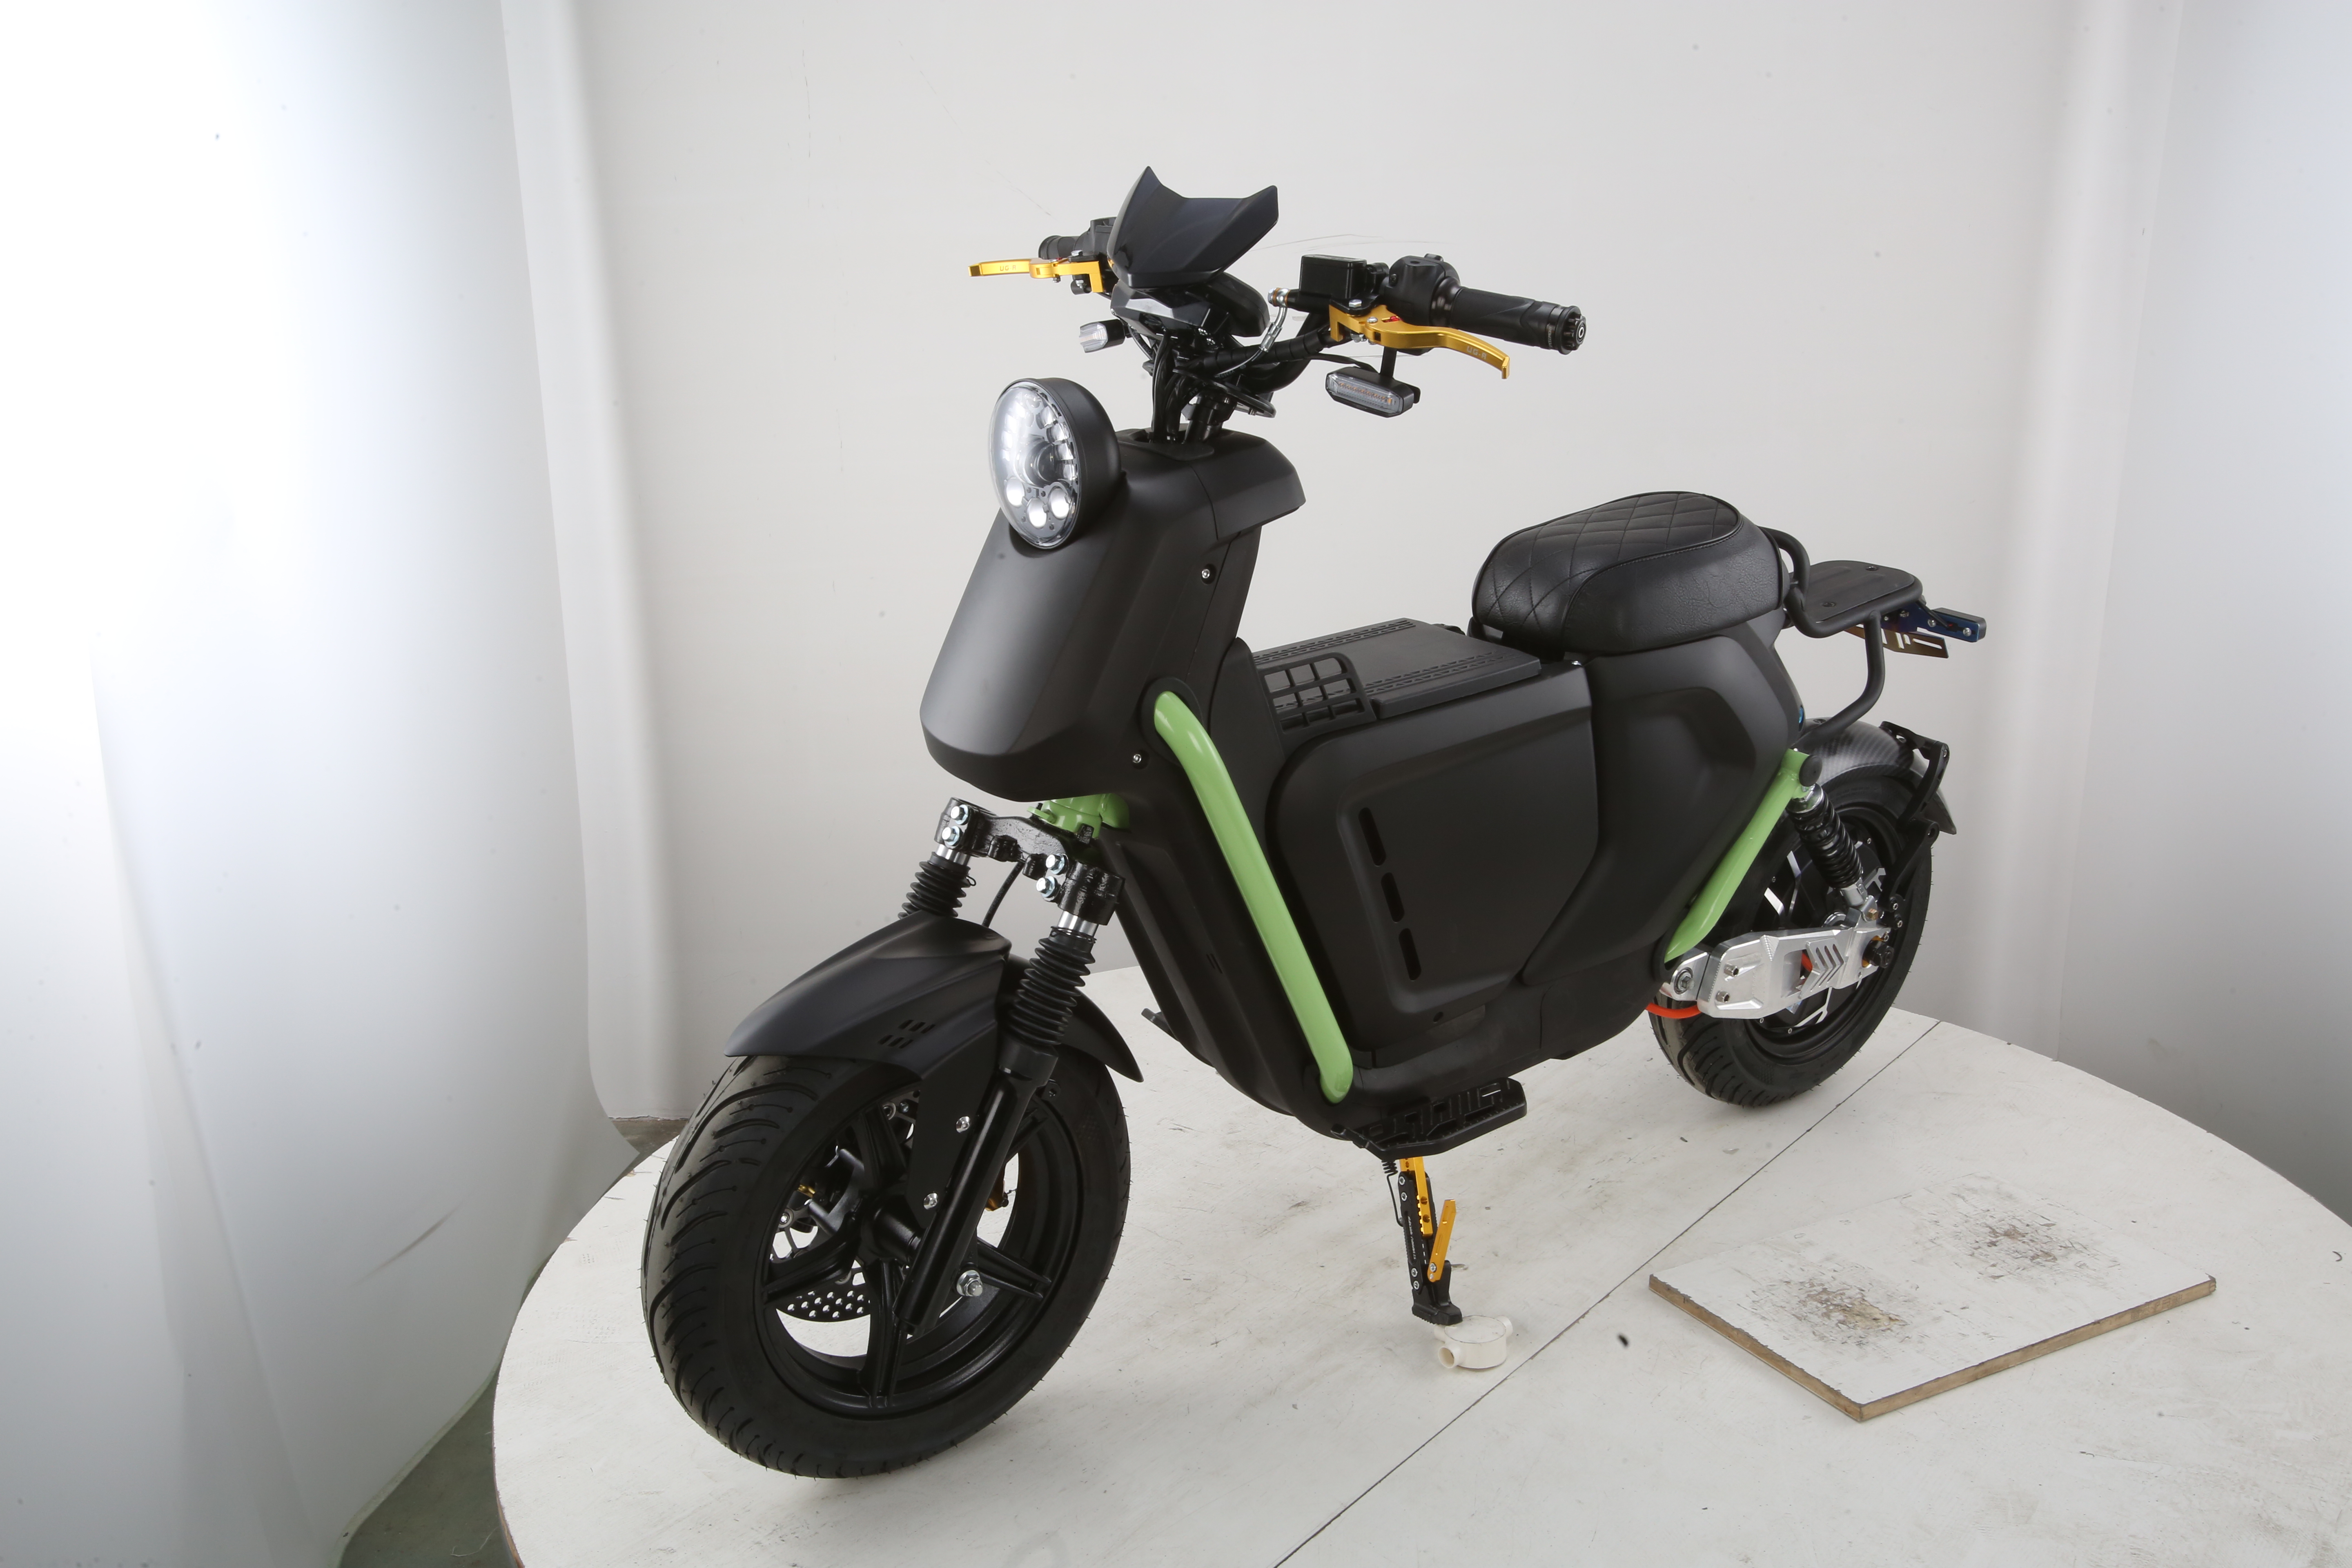 Chinese original electric two wheeled vehicles are becoming popular at foreign market